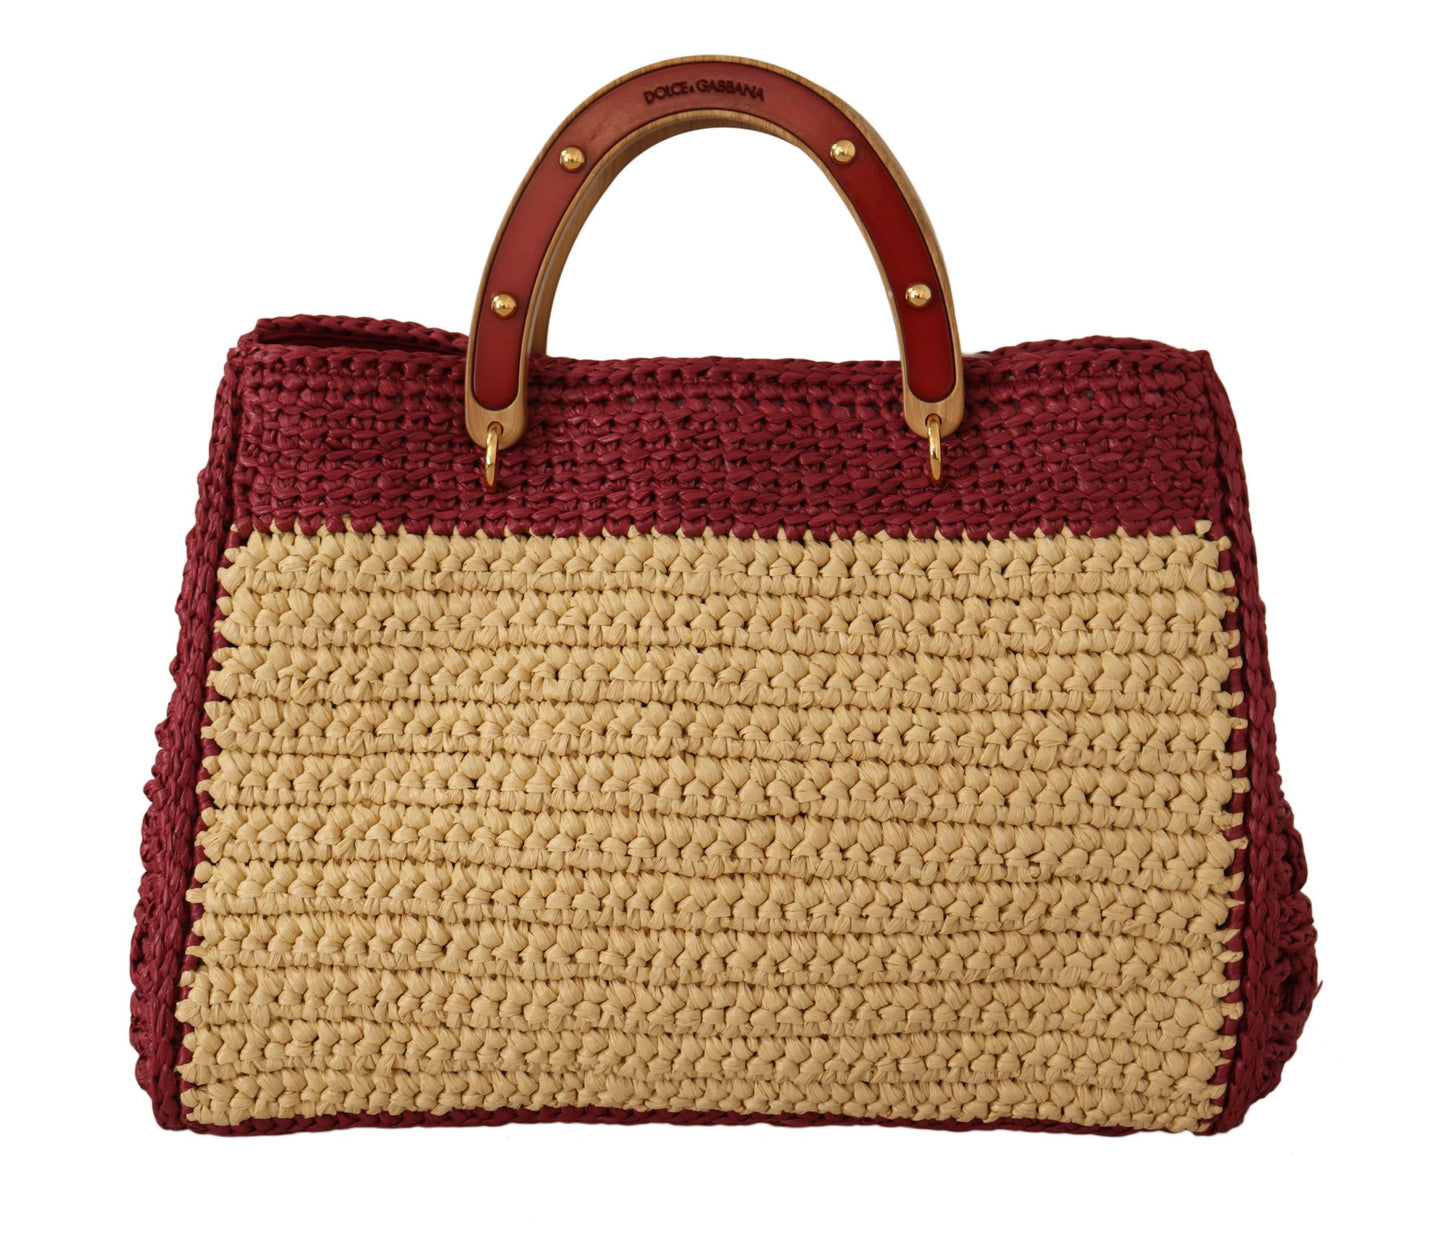 Chic Beige Raffia Tote with Maroon Accents